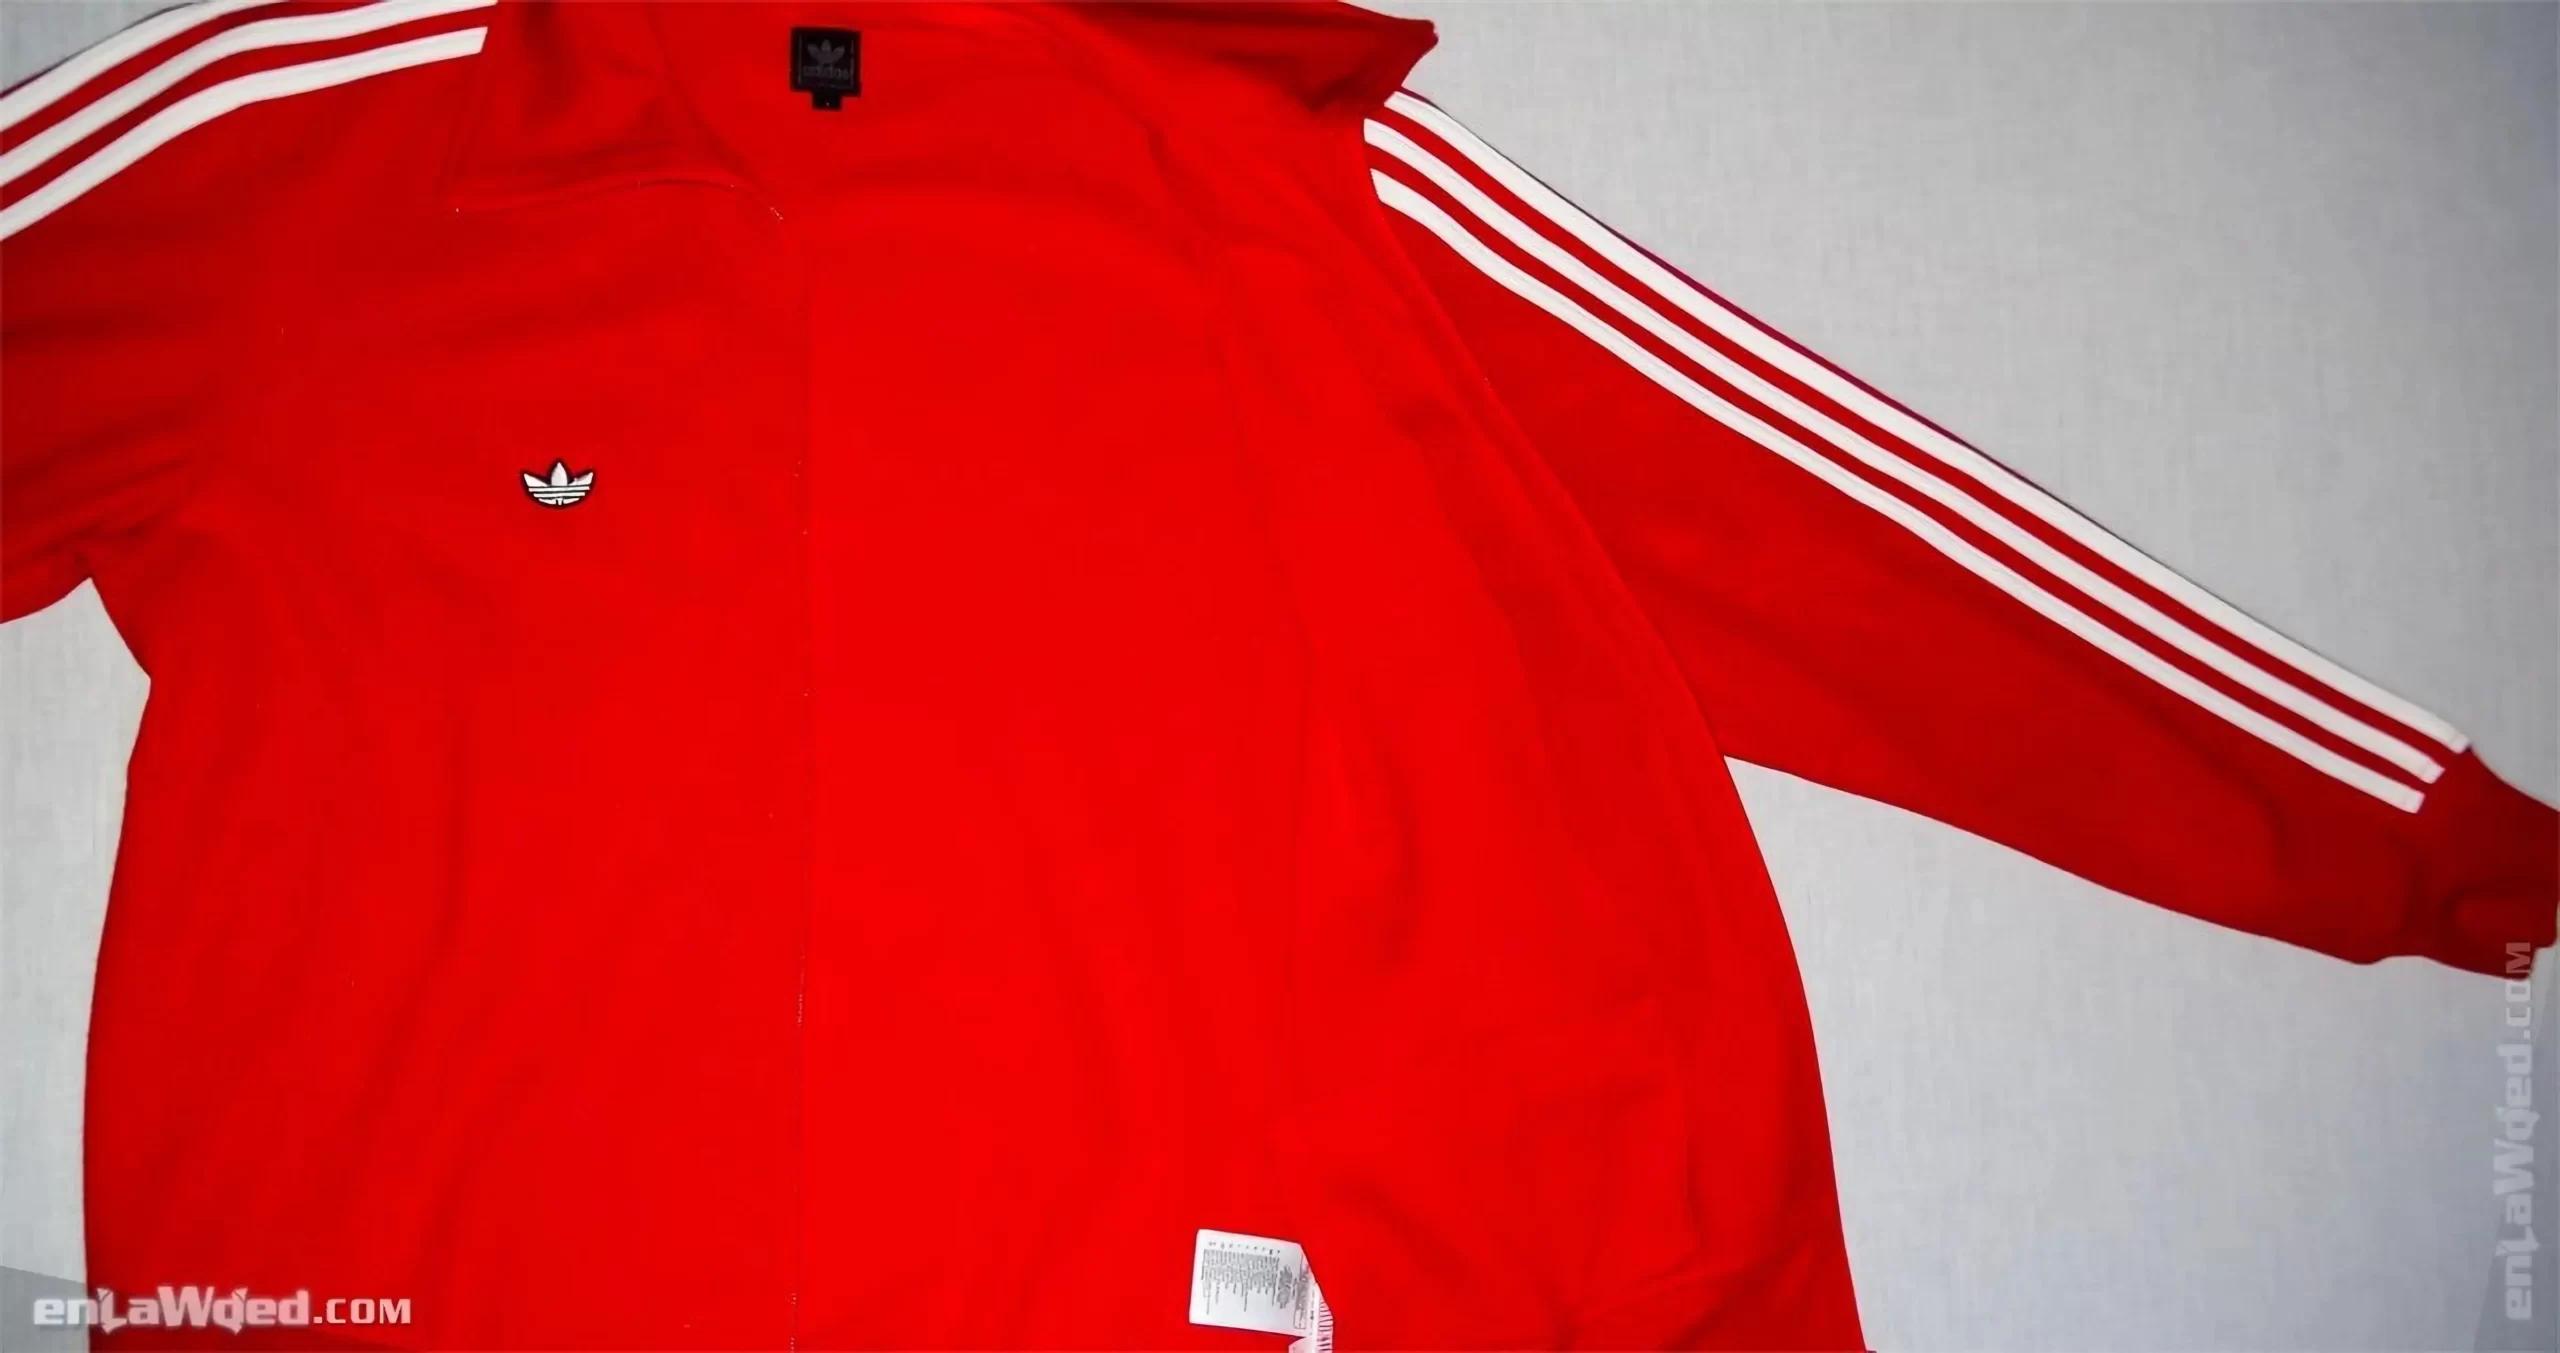 Men’s 2007 Slovakia Love Track Top by Adidas Originals: Uncovered (EnLawded.com file #lmcgfsnmtx17zxyfj7g)